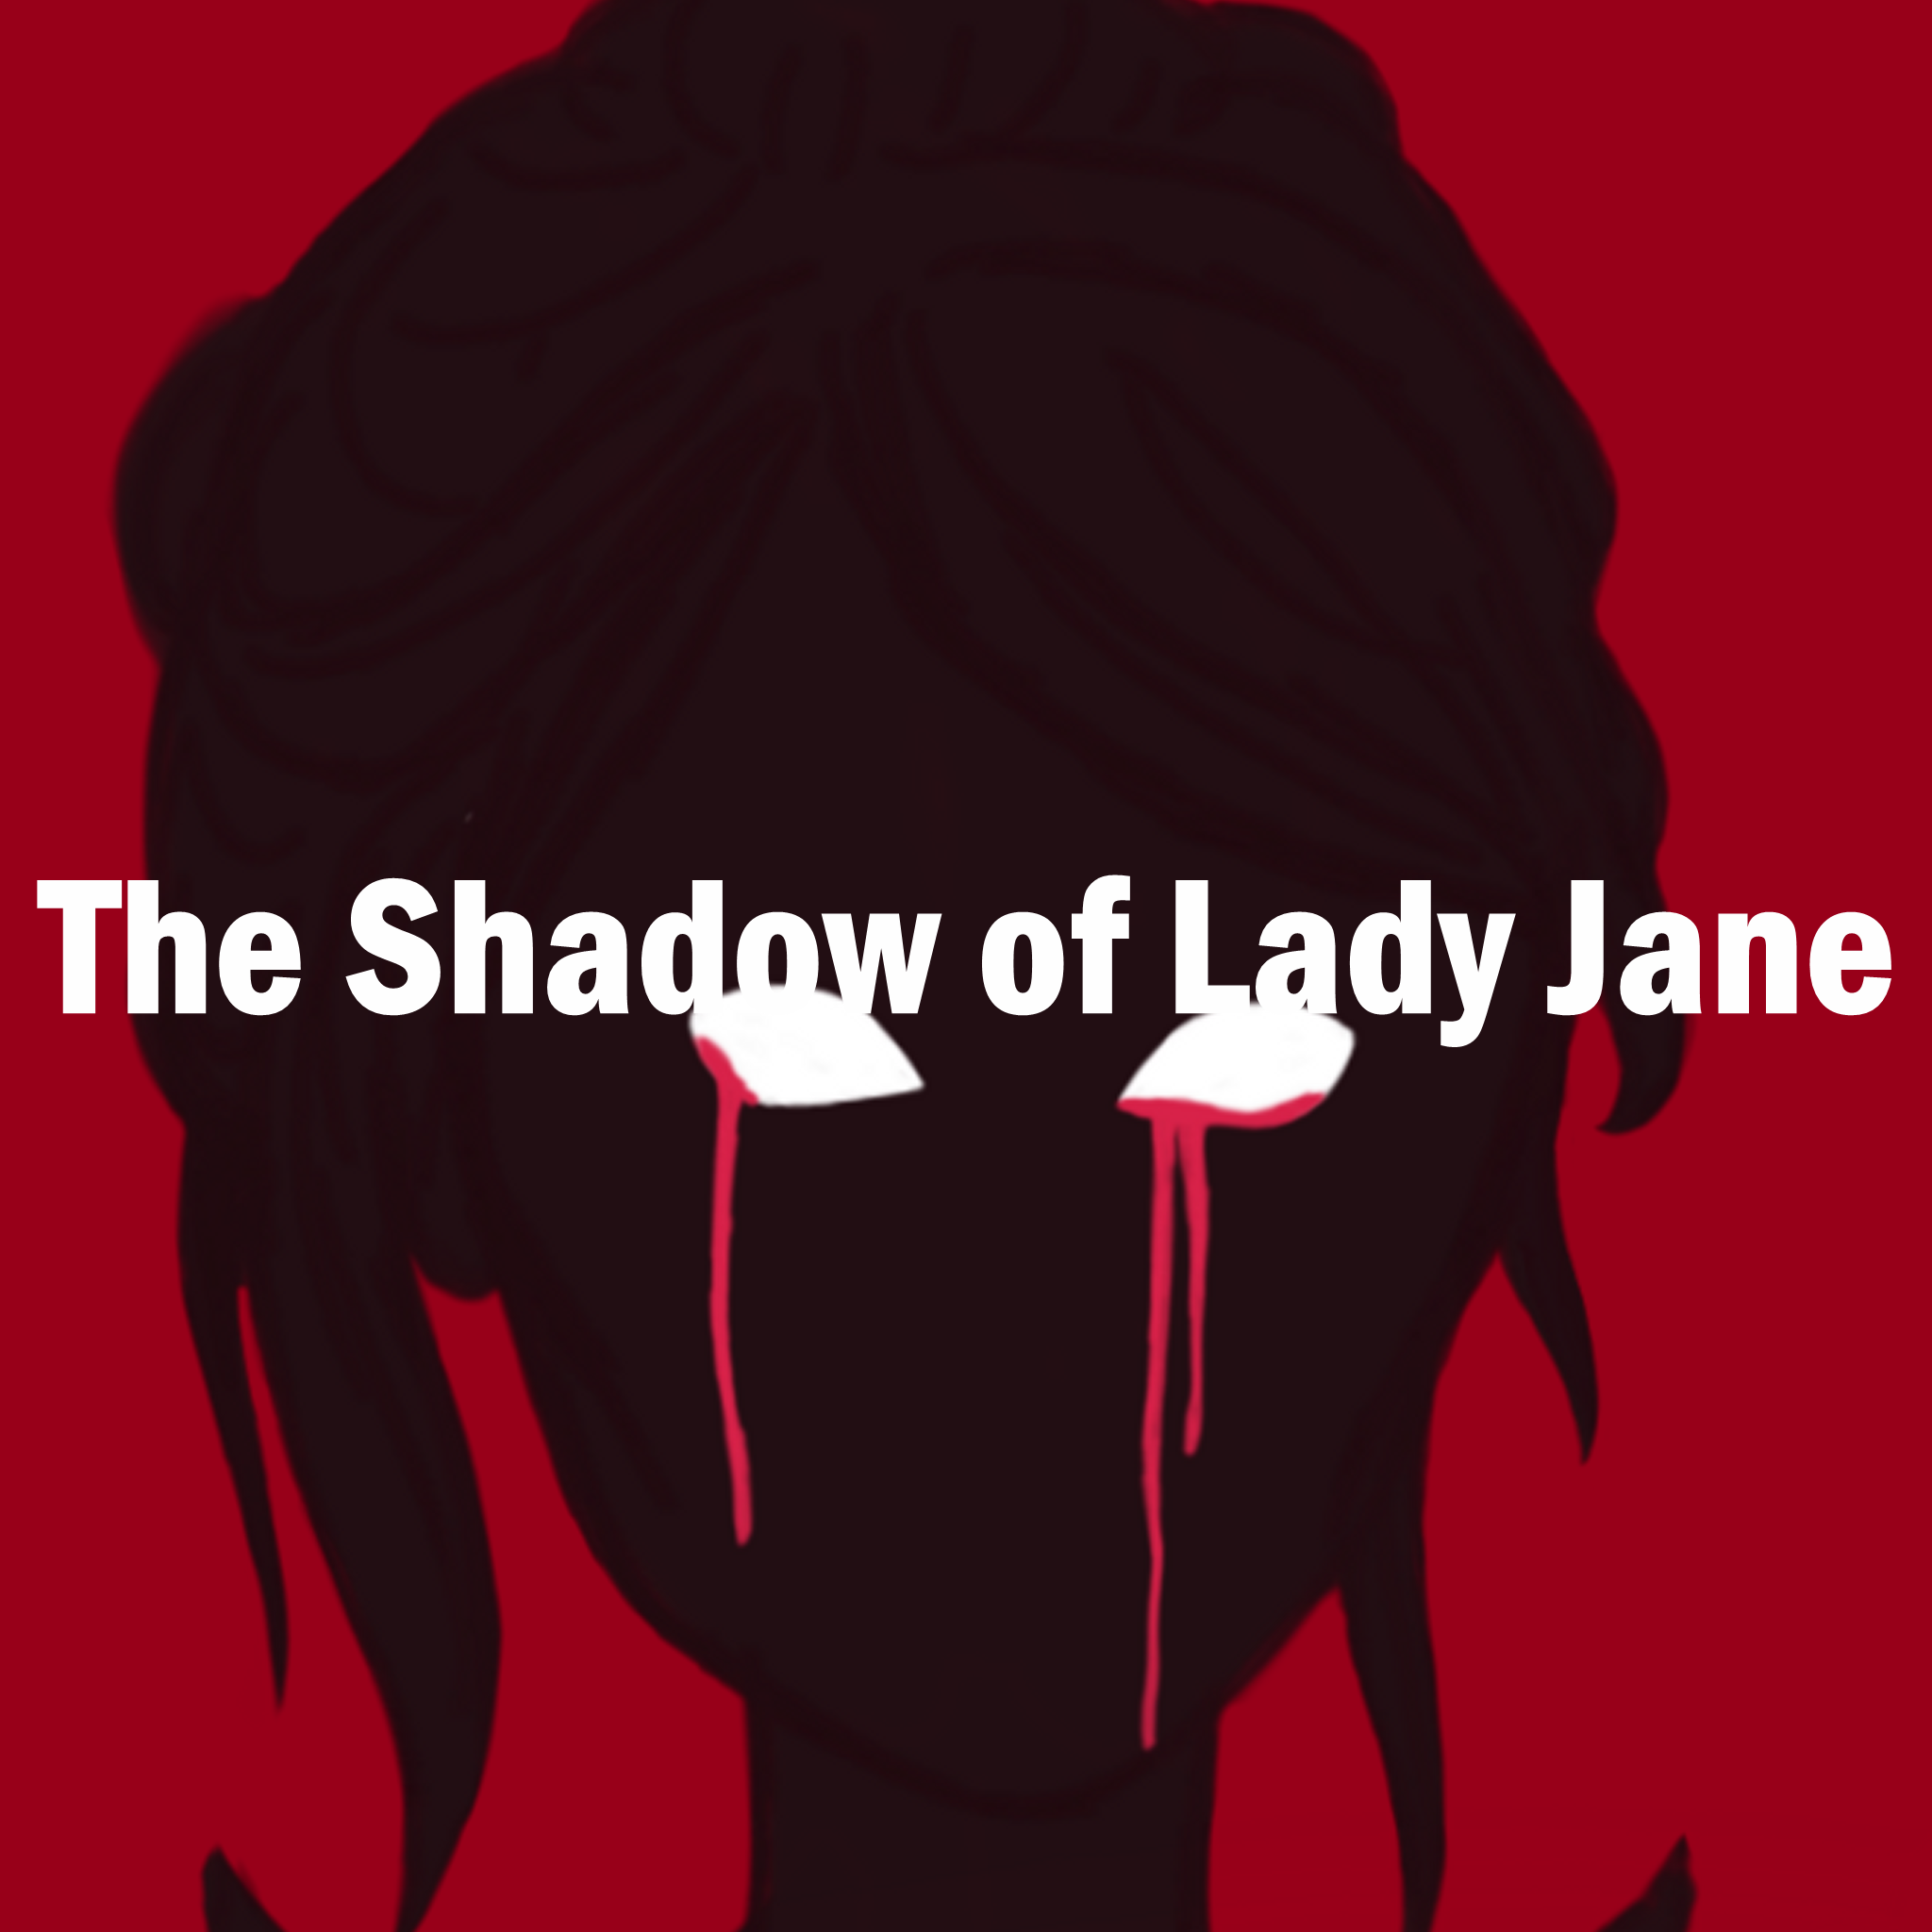 The Shadow of Lady Jane